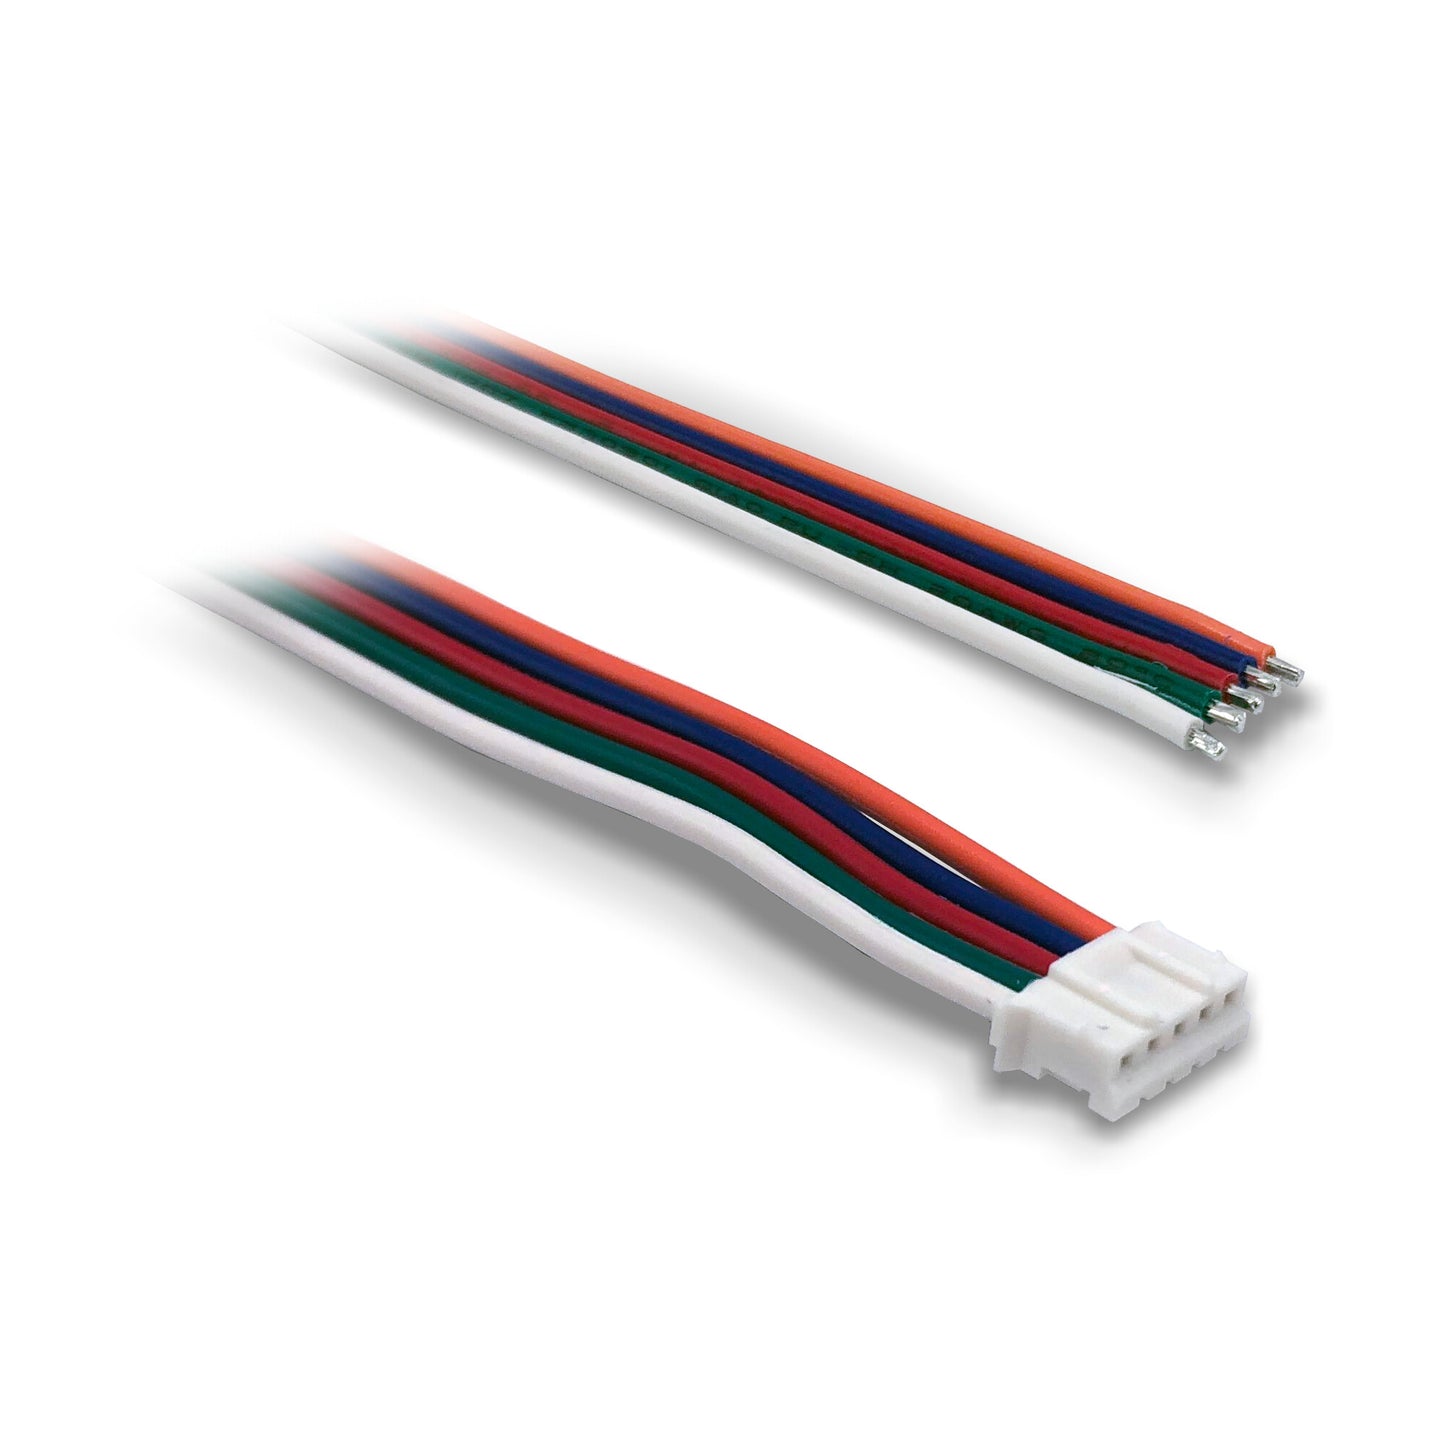 Nexmosphere RGBW connector, color coded cable 15cm, stripped end